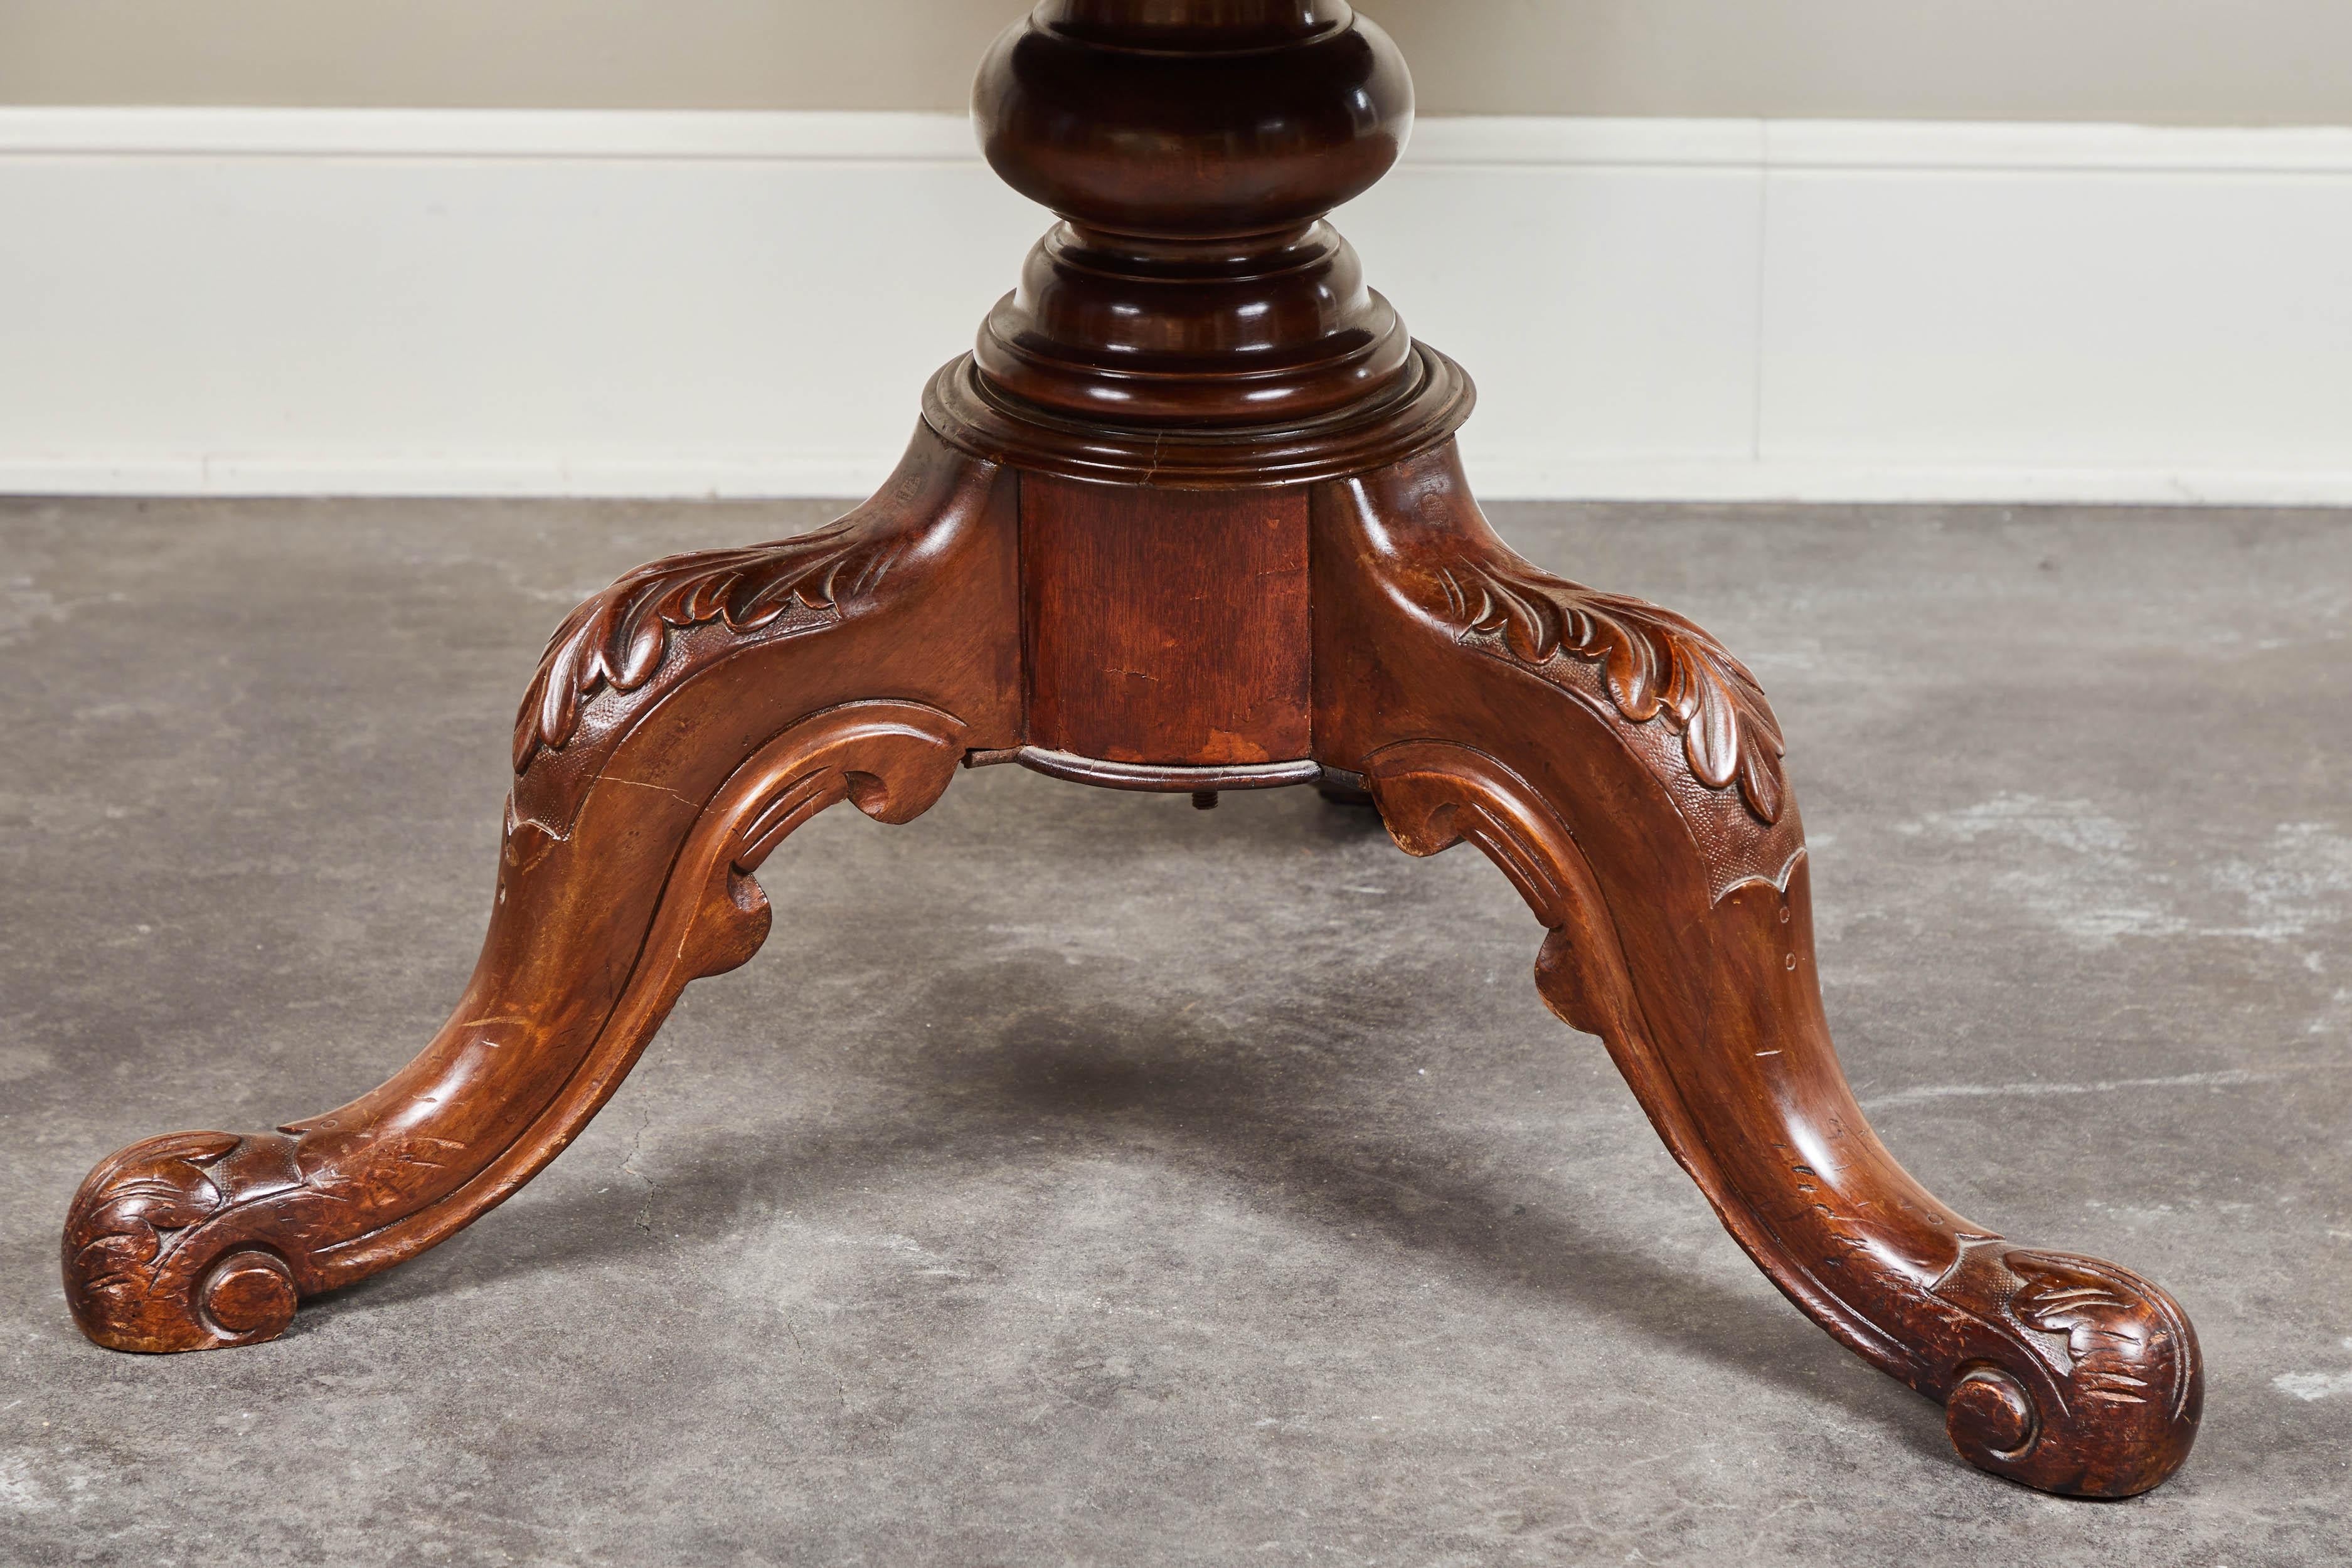 A handsome late 19th century French pedestal table with intricate carvings of acanthus leaves in the legs and feet.